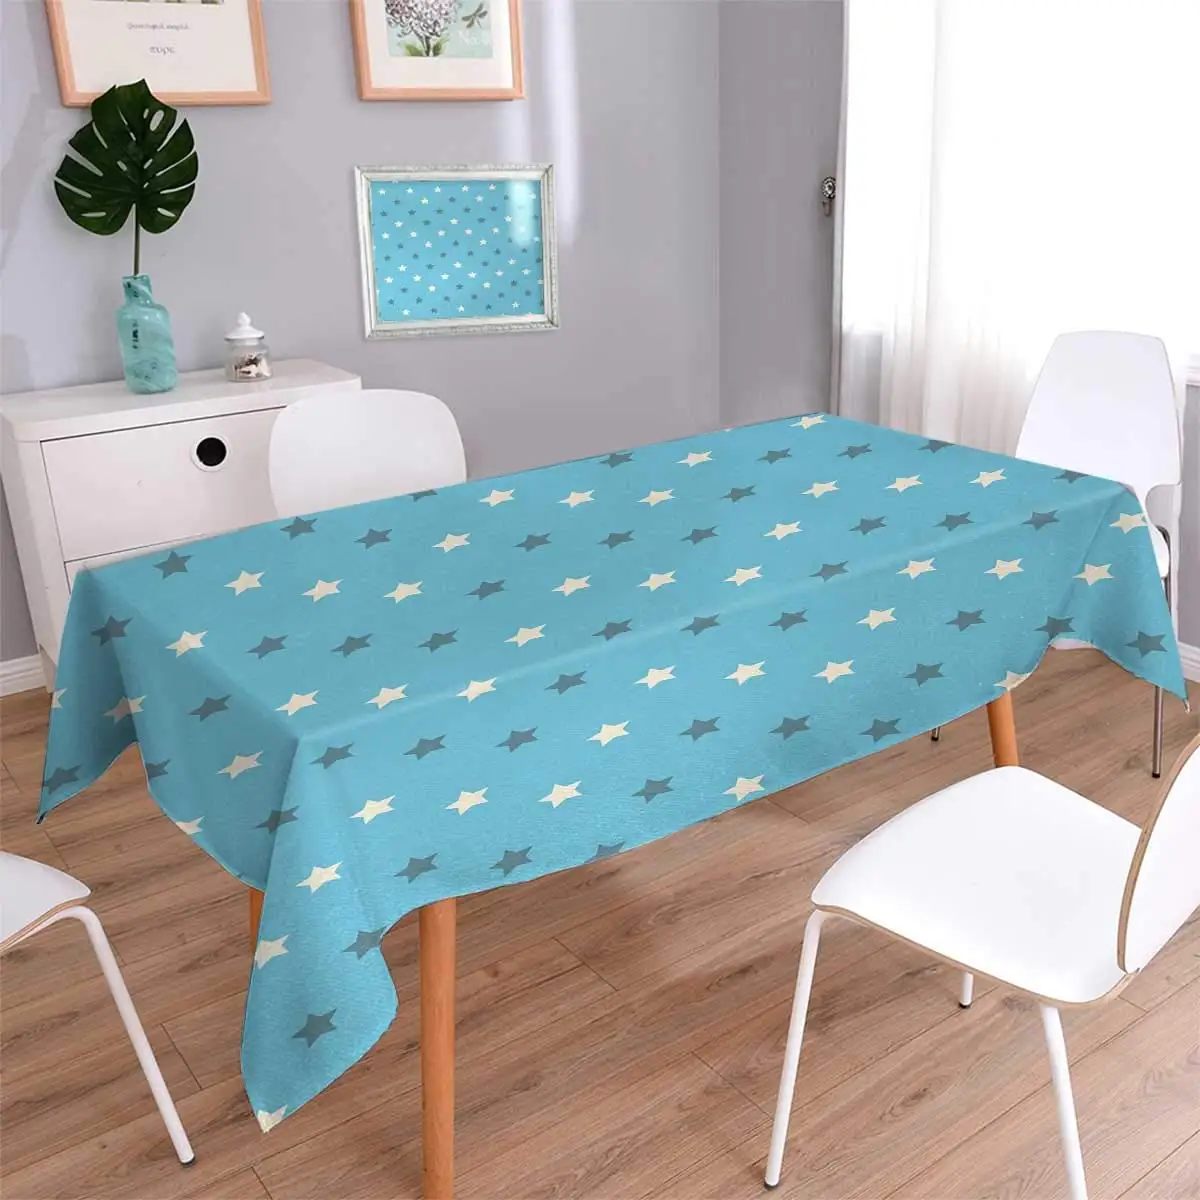 Фото Geometric Tablecloth Stars Pattern with Blue Background Retro Zigzag Design Vintage Motifs Oblong Wrinkle Resistant Table Cover | Дом и сад